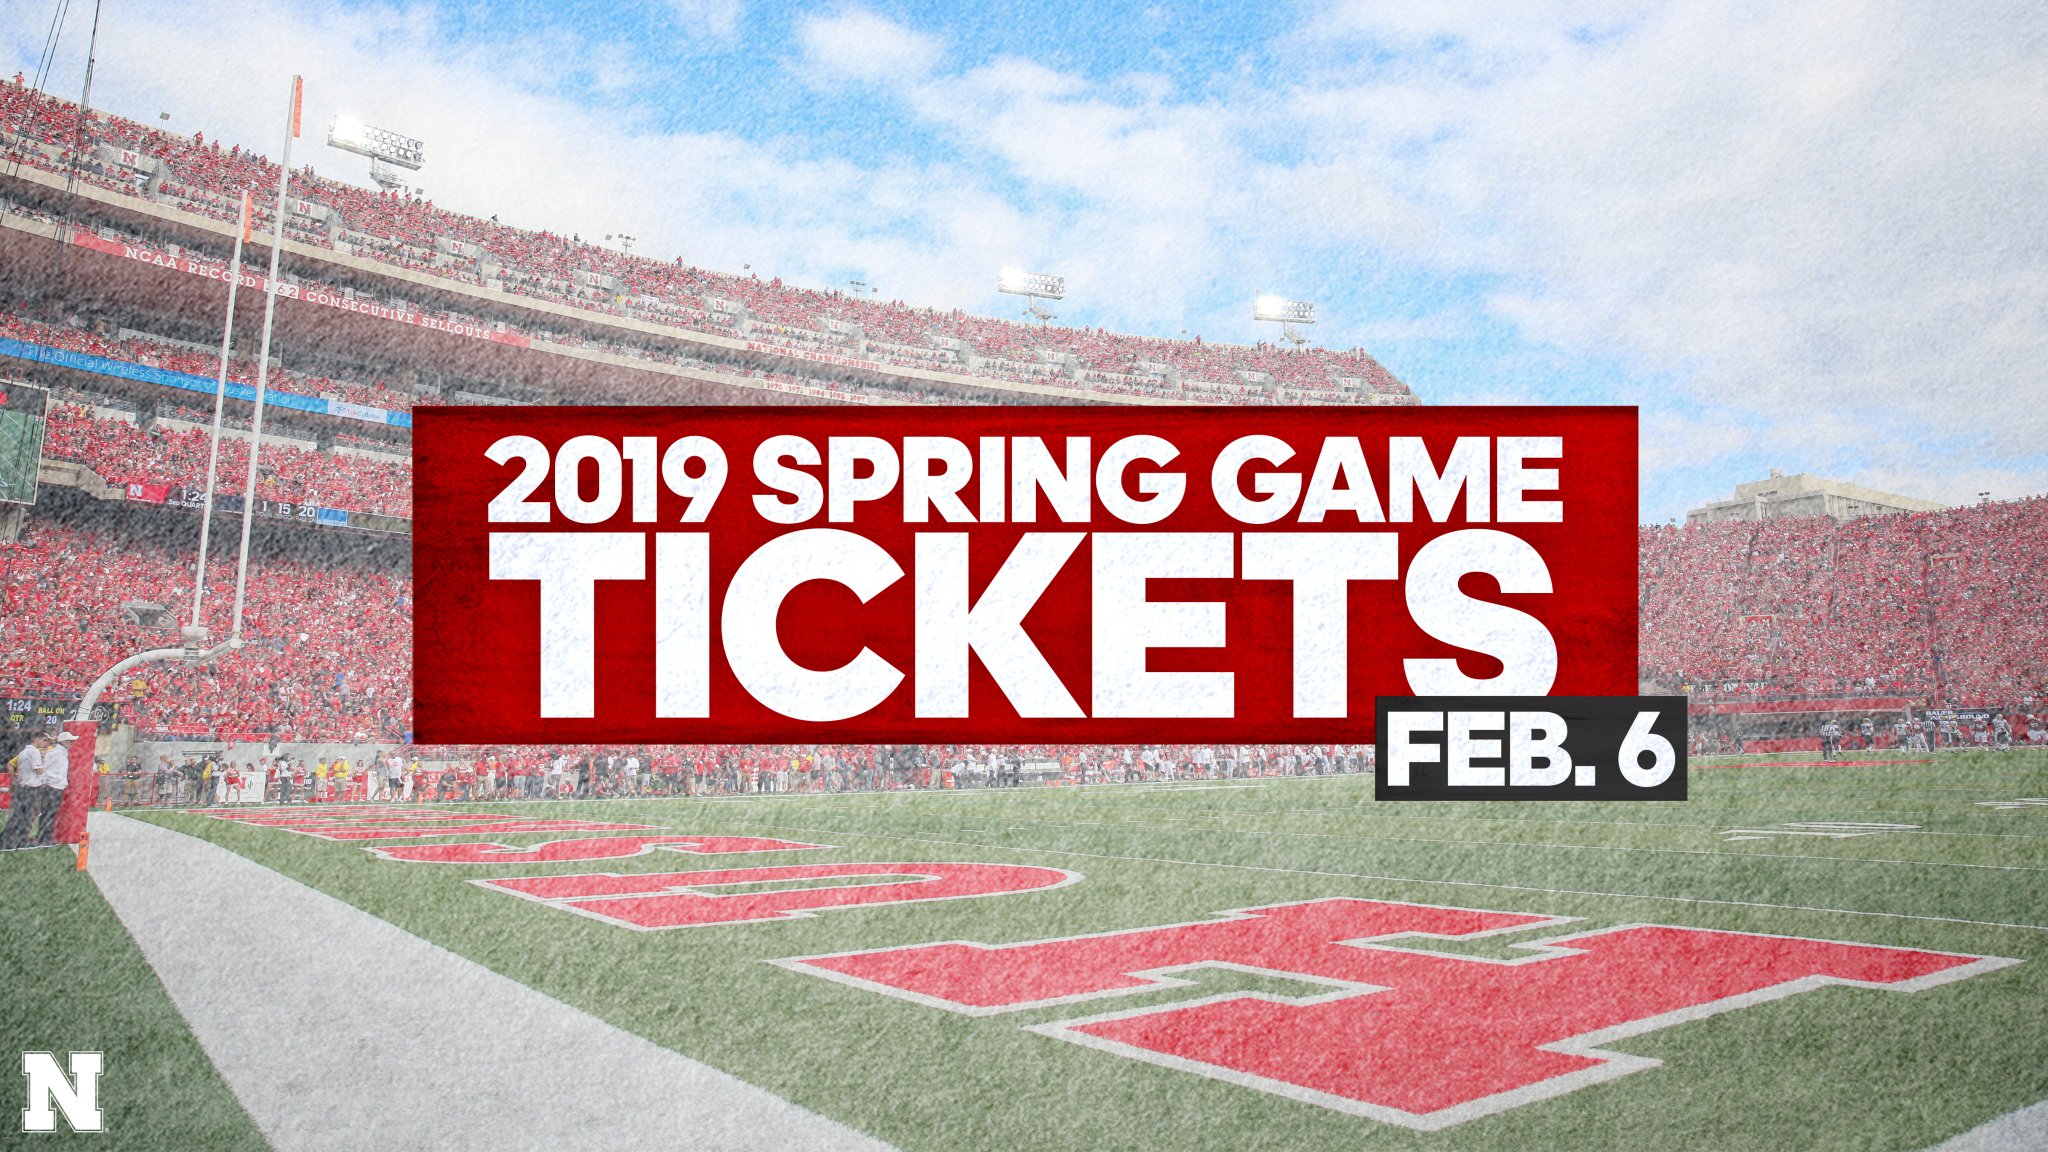 Nebraska Huskers on Twitter "Spring Game tickets on sale to public on